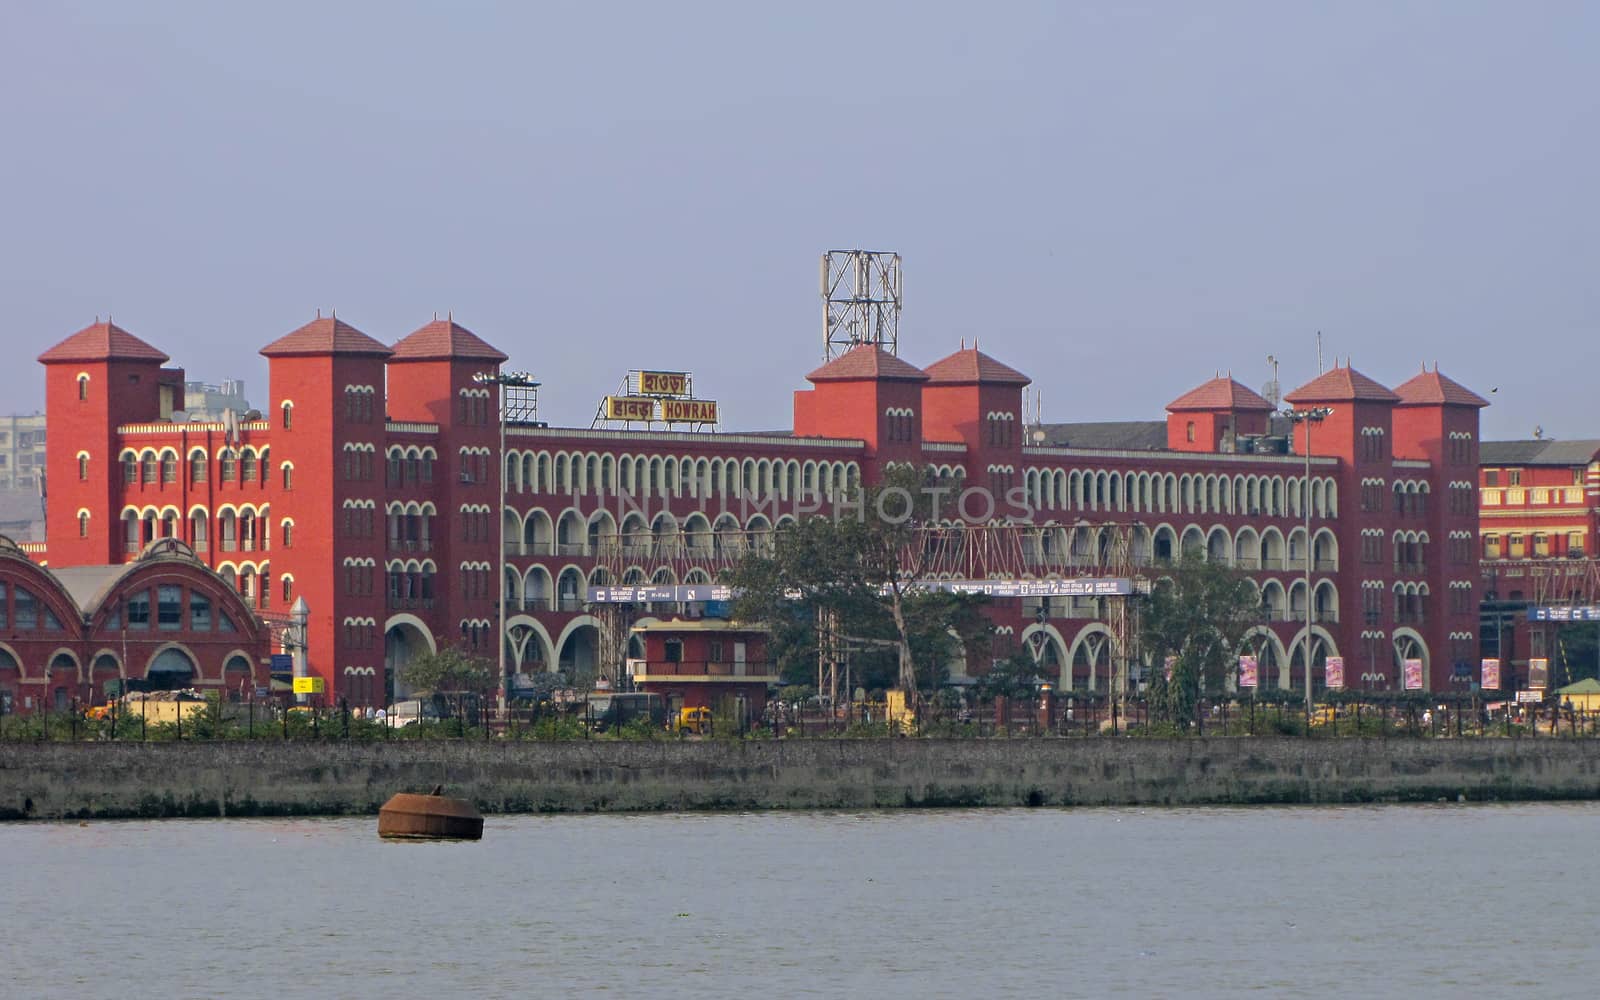 View of historical Howrah railway station building from across the Hooghly river in Kolkata. by lalam